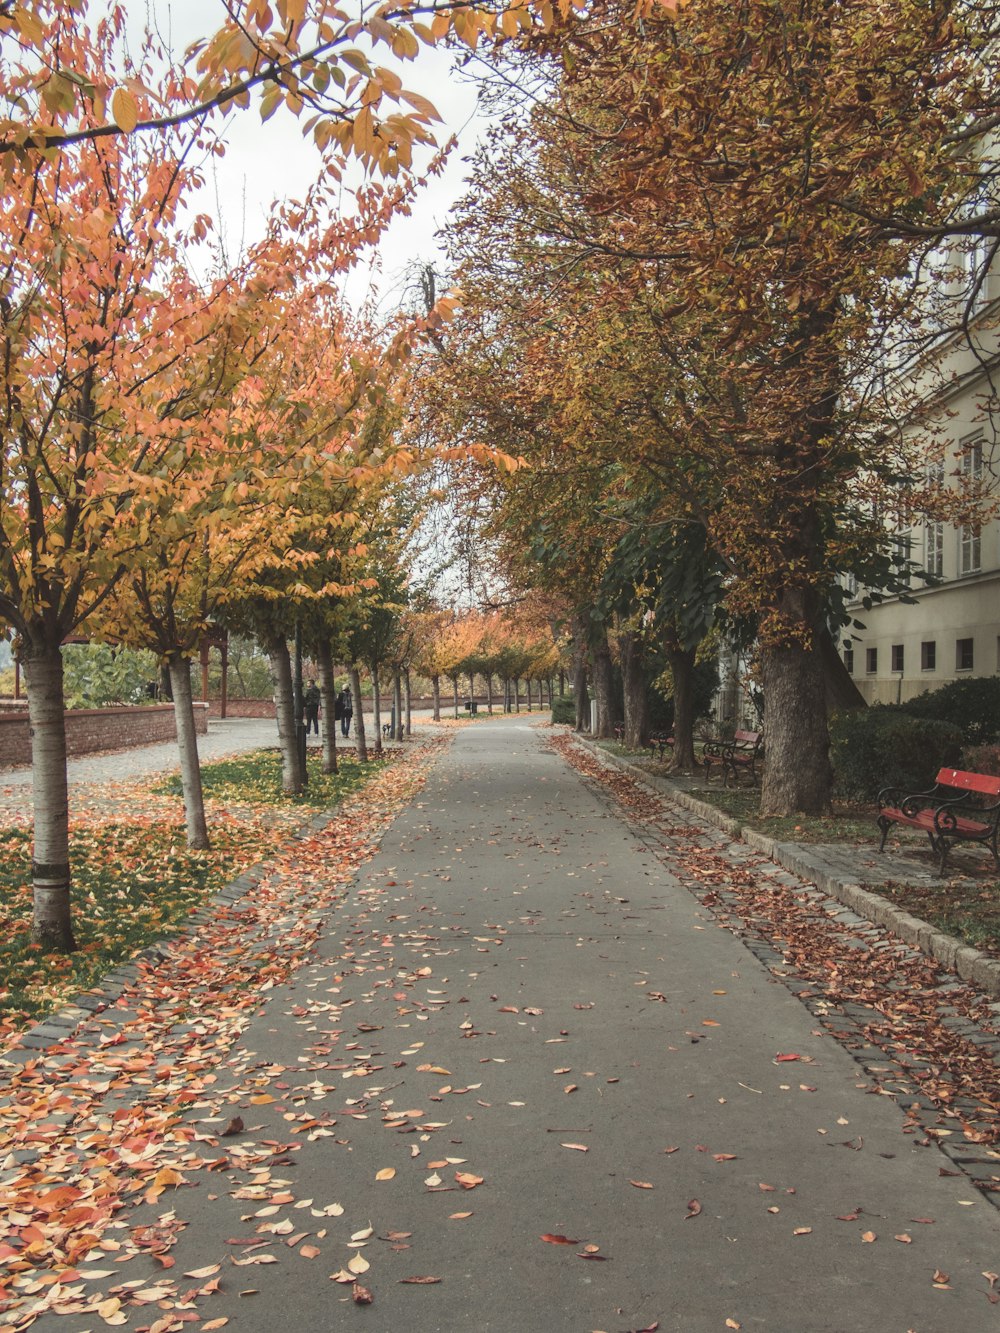 a sidewalk lined with trees and a red bench